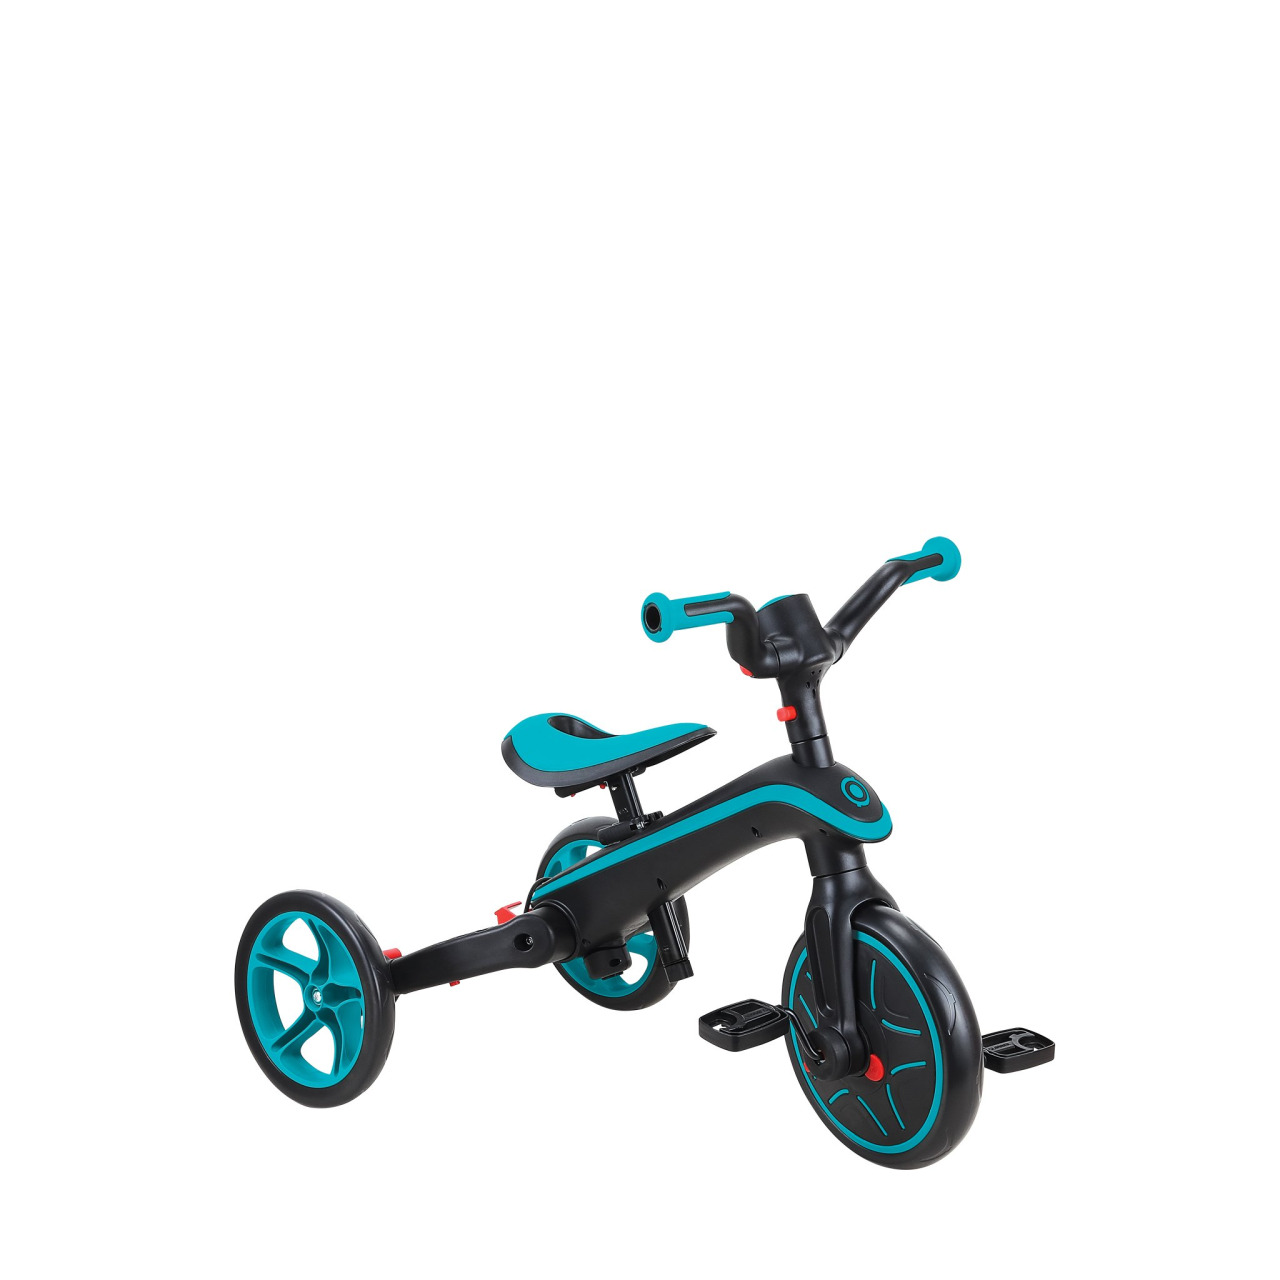 732 105 Foldable Tricycle Training Trike